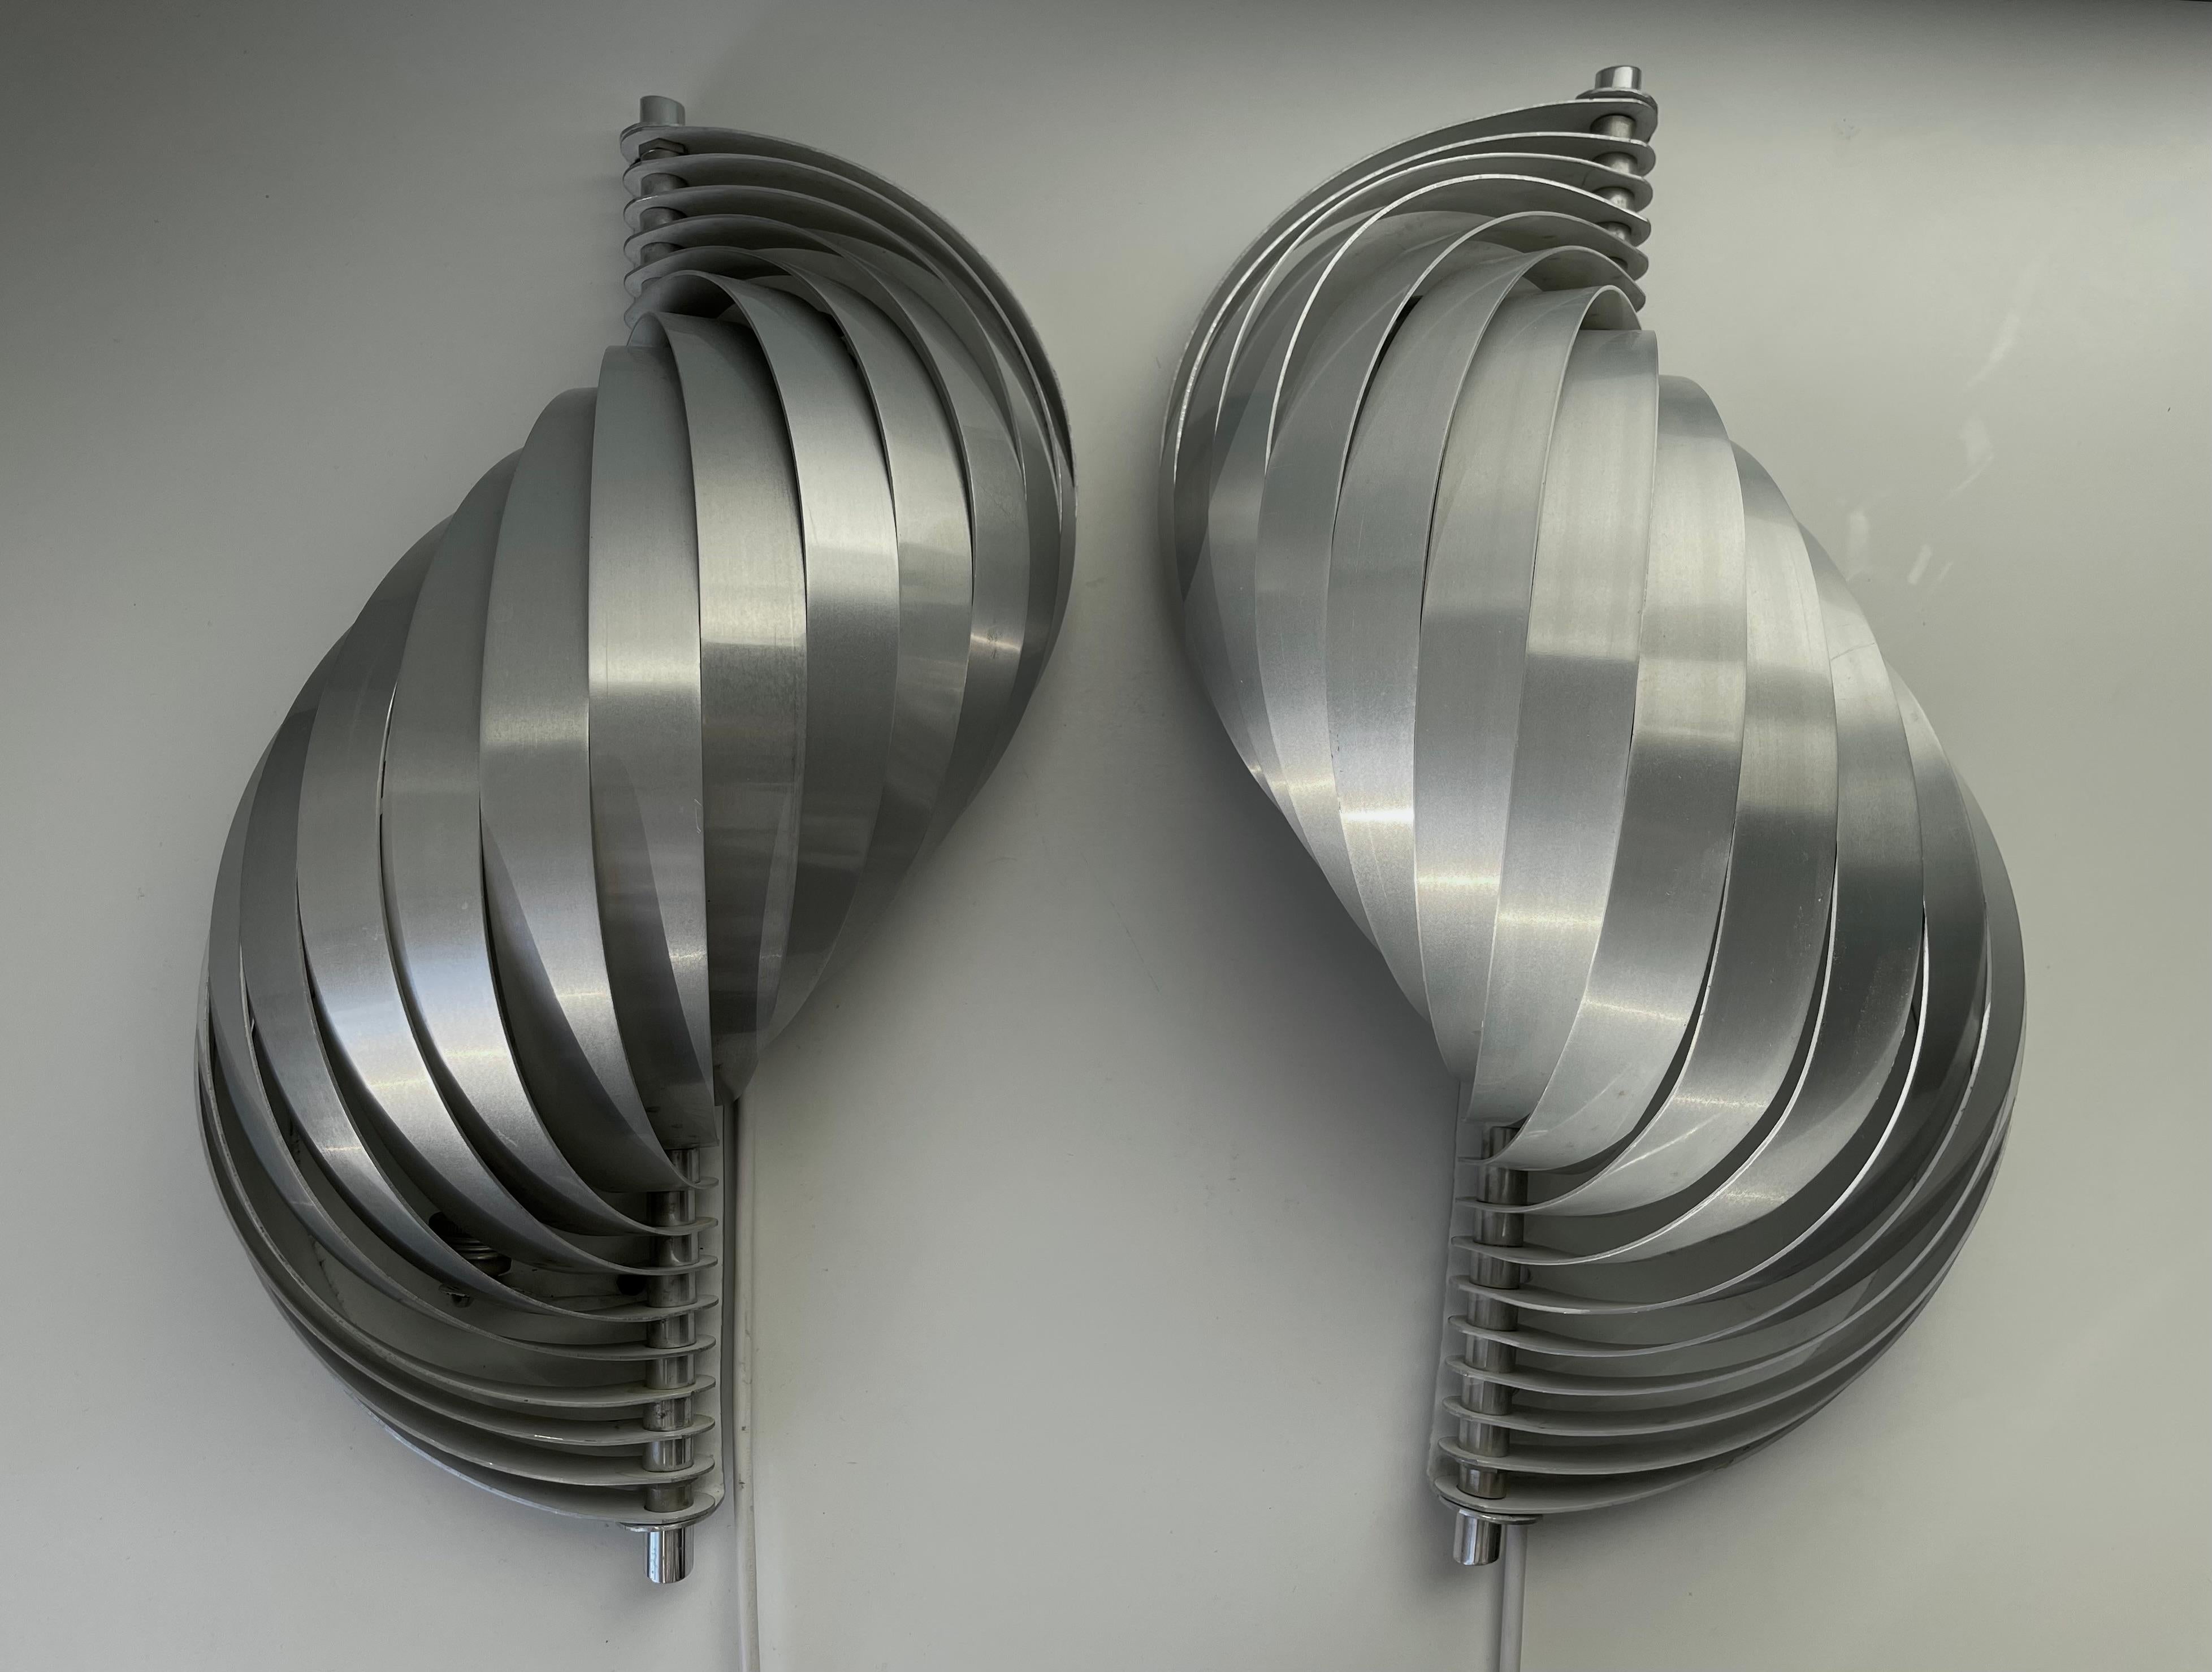 Stunning pair of shiny shell shaped aluminum futuristic wall sconces by French designer Henri Mathieu in the early 1970s. Brushed softly bent silver colored aluminum lamels compose this set of sculptural space age lights. Mounted on metal plate and